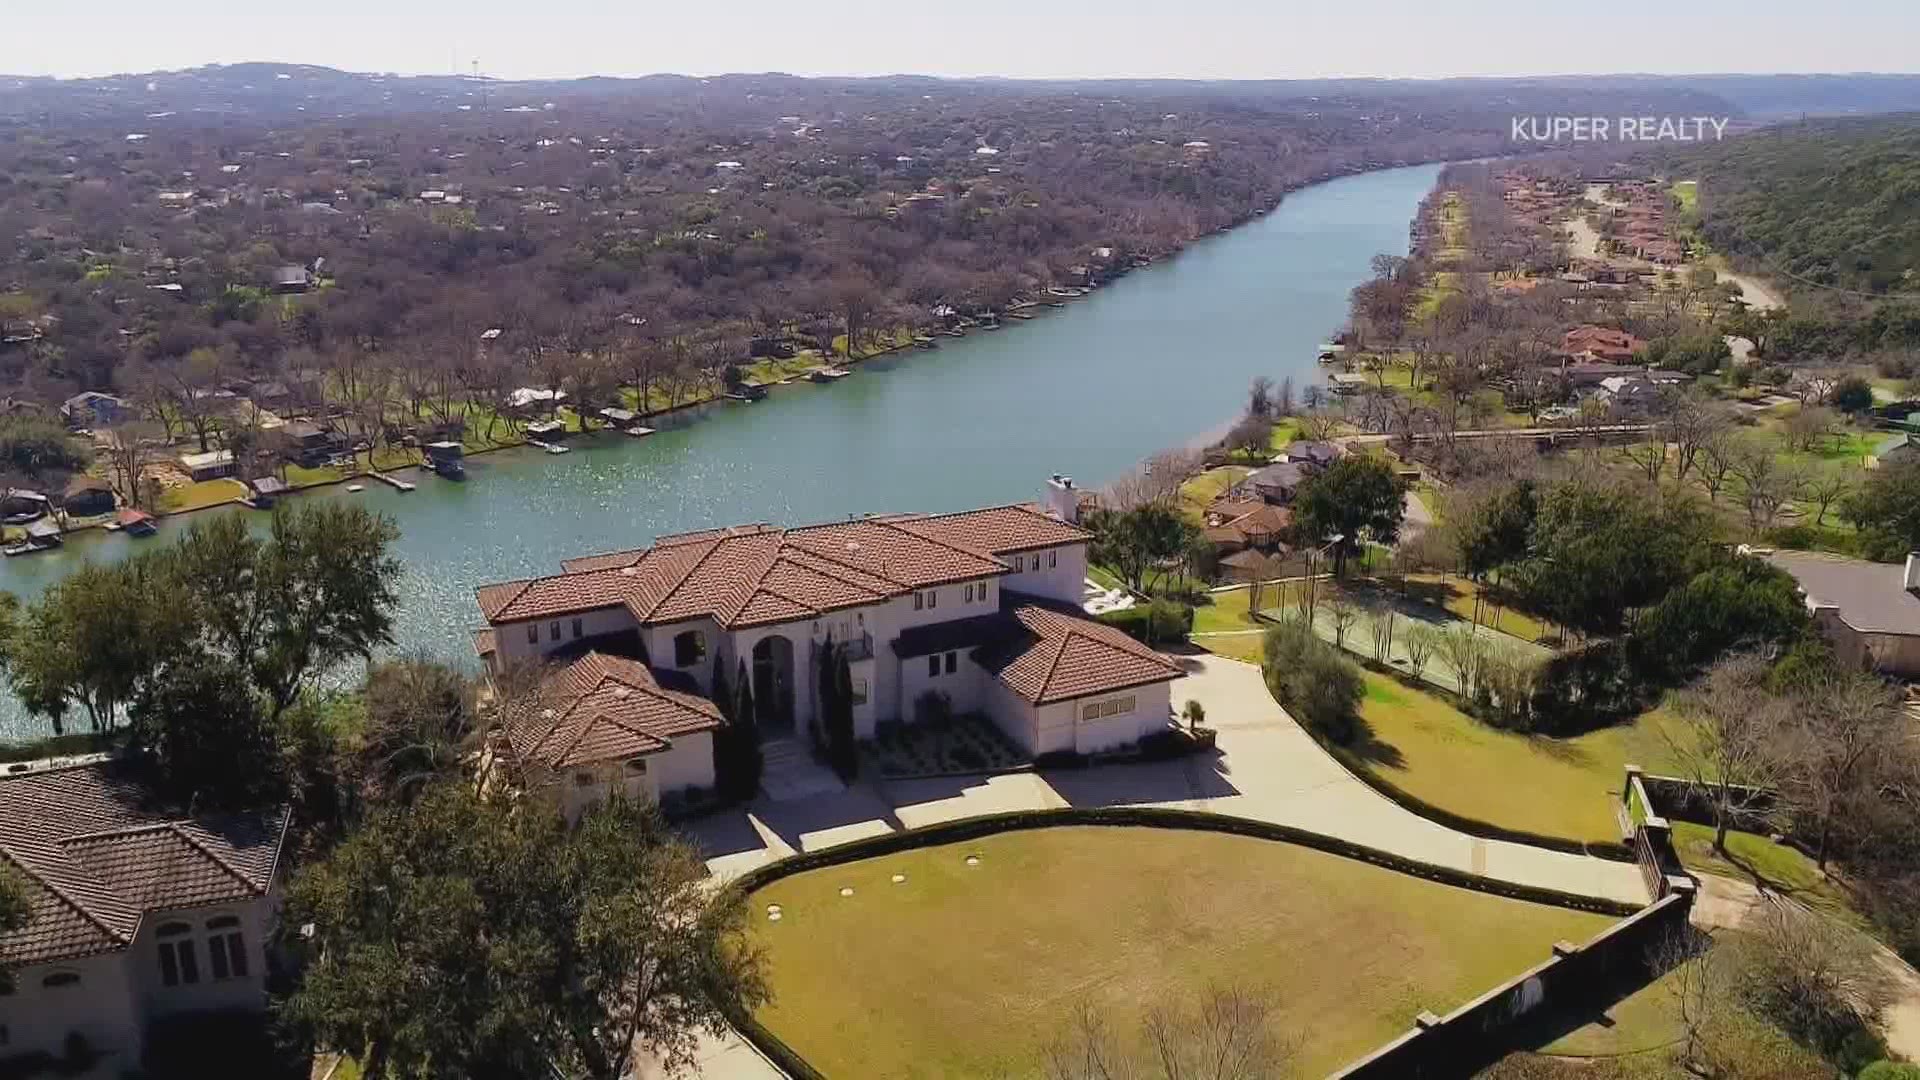 Home sales in the Austin area are surging. And one of the biggest areas of growth is multi-million dollar home sales.